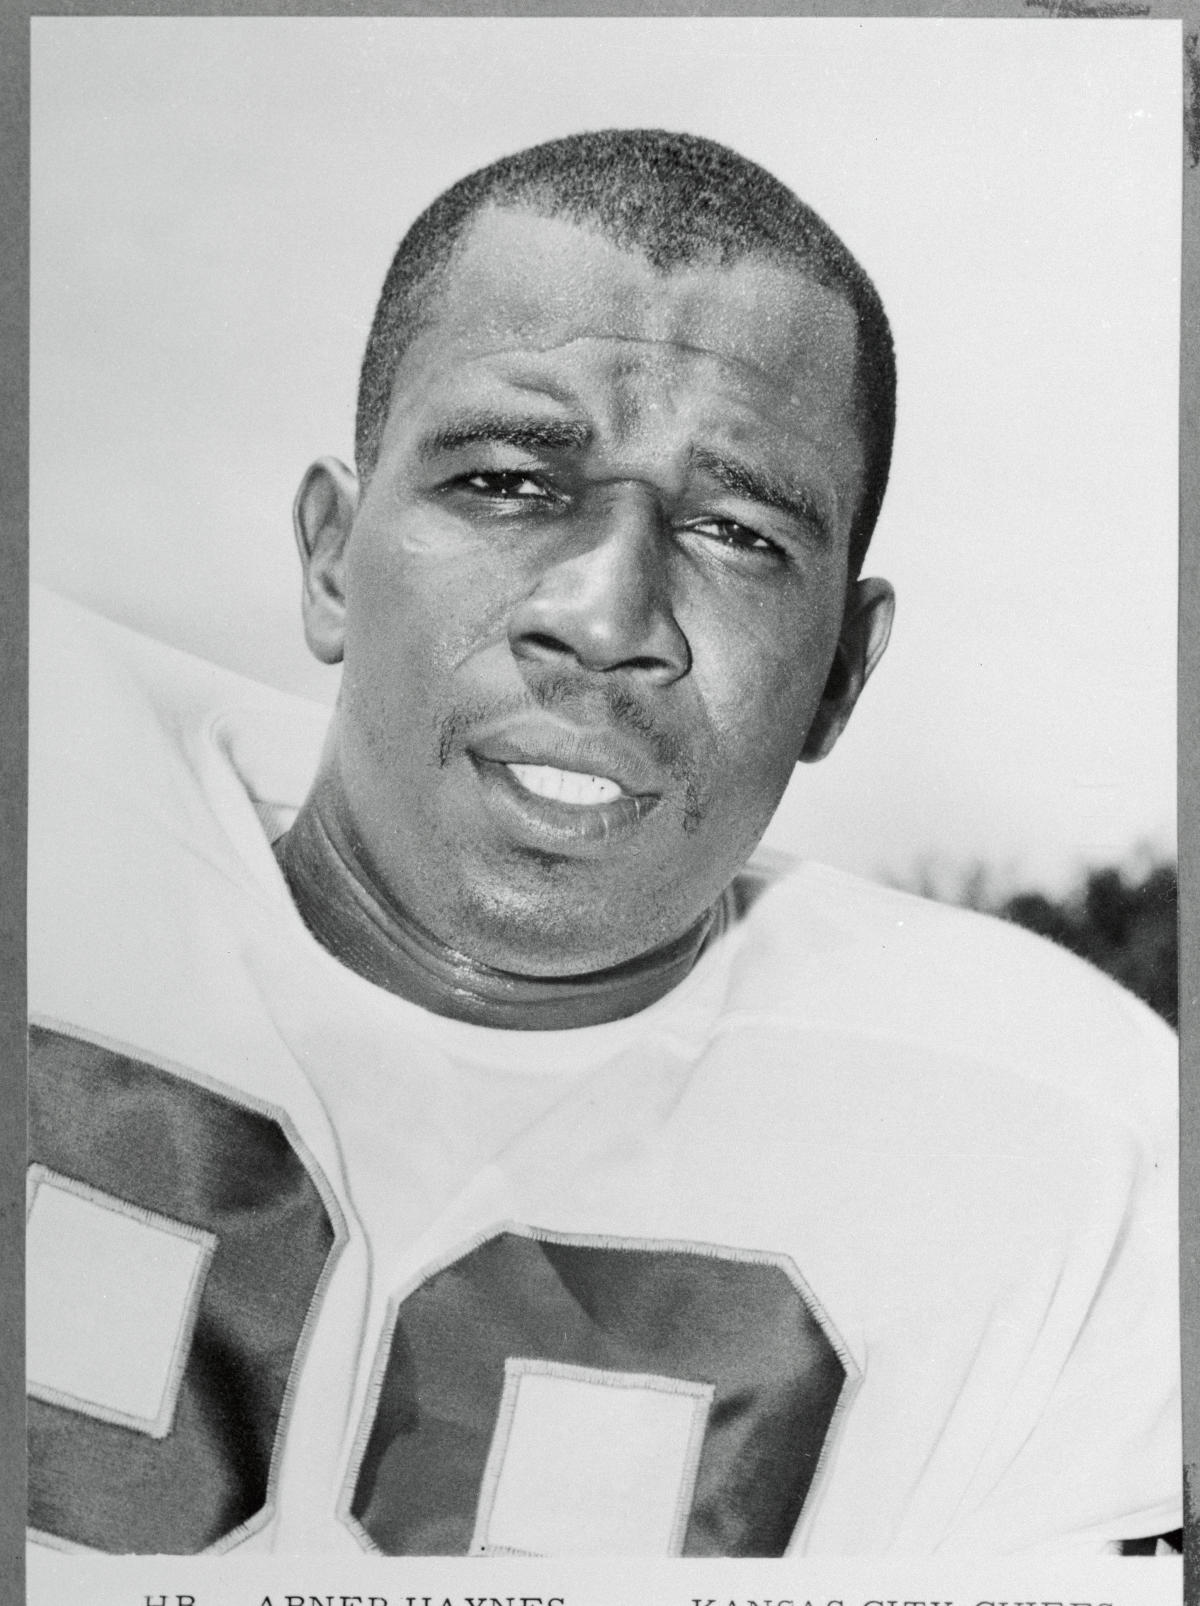 Abner Haynes, Chiefs Hall of Fame running back and former AFL MVP, dies at age 86